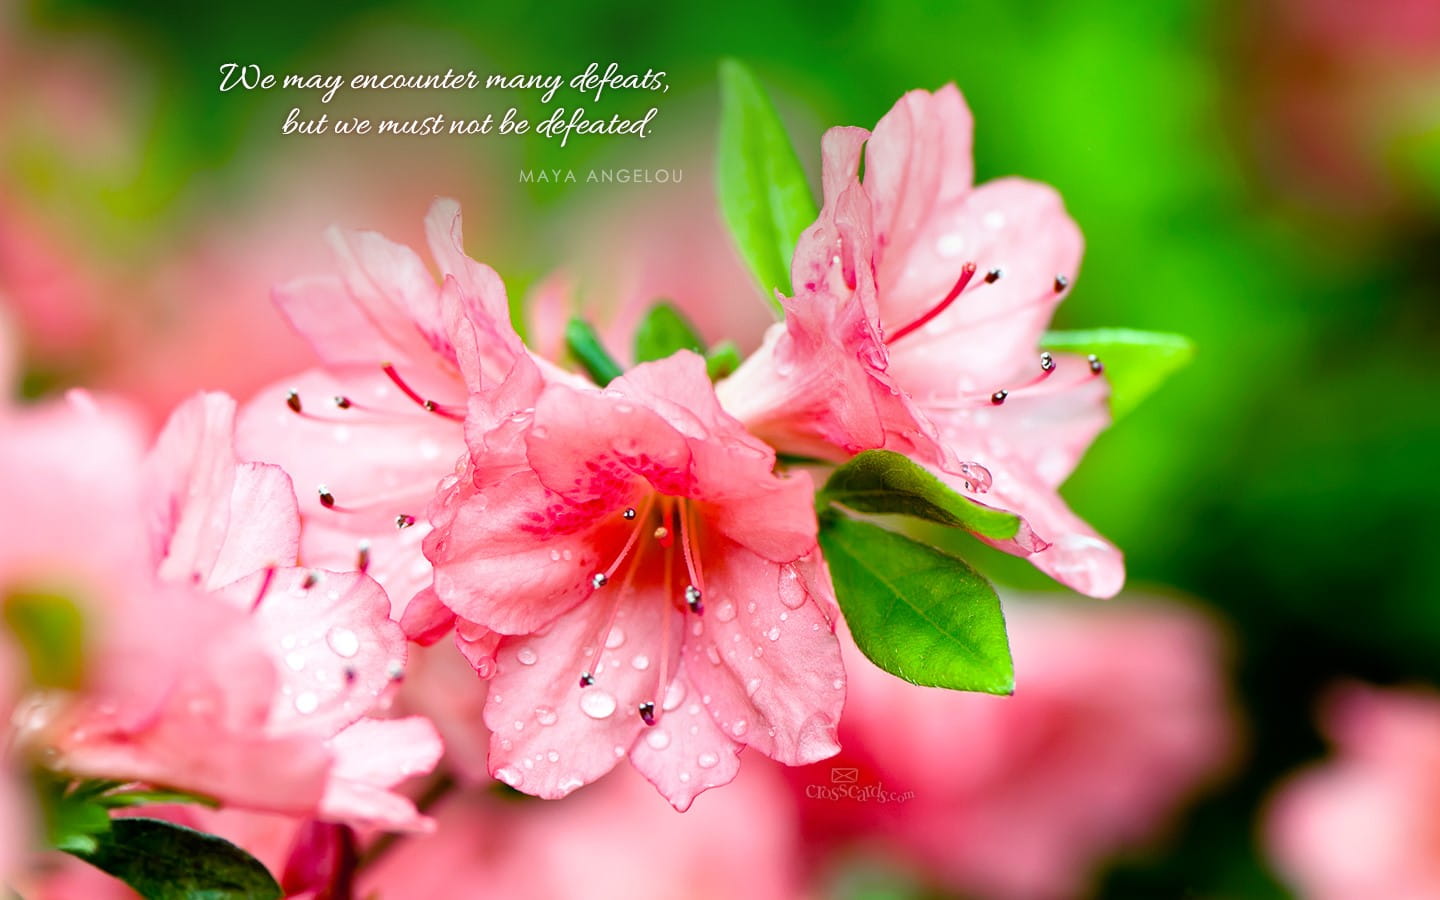 Maya Angelou Quotes About Flowers - HD Wallpaper 